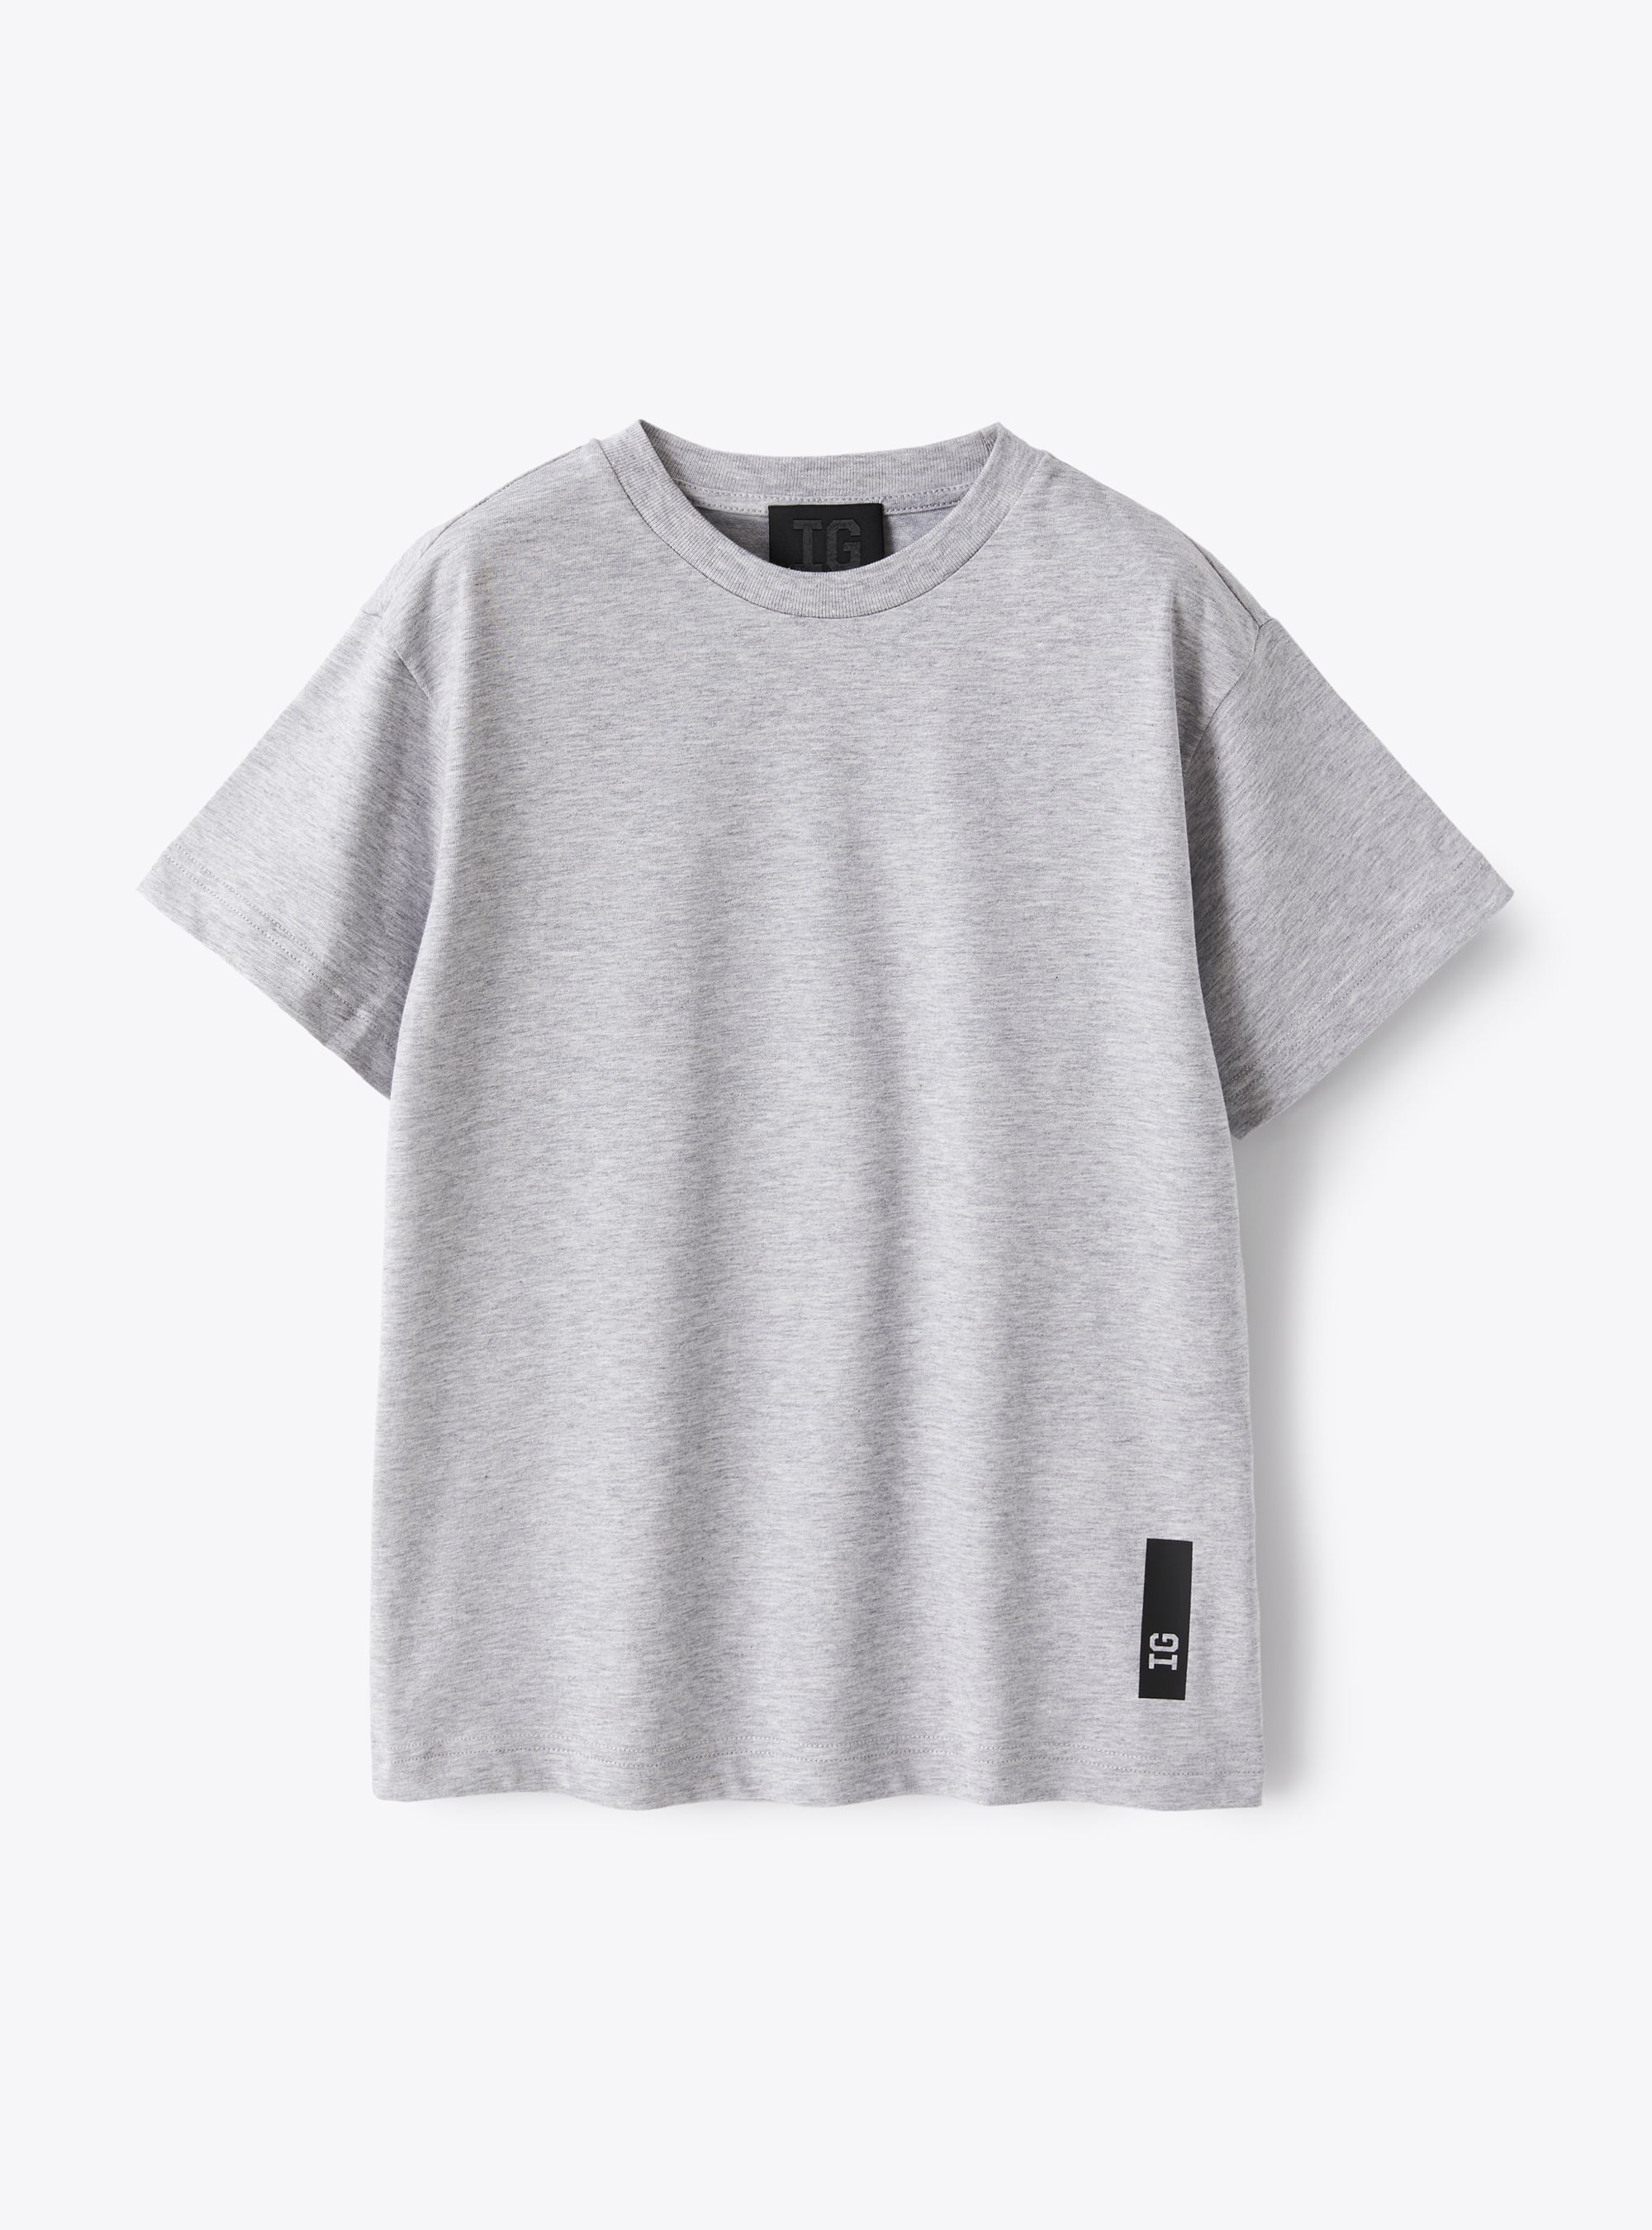 T-shirt in marled-grey cotton jersey - T-shirts - Il Gufo